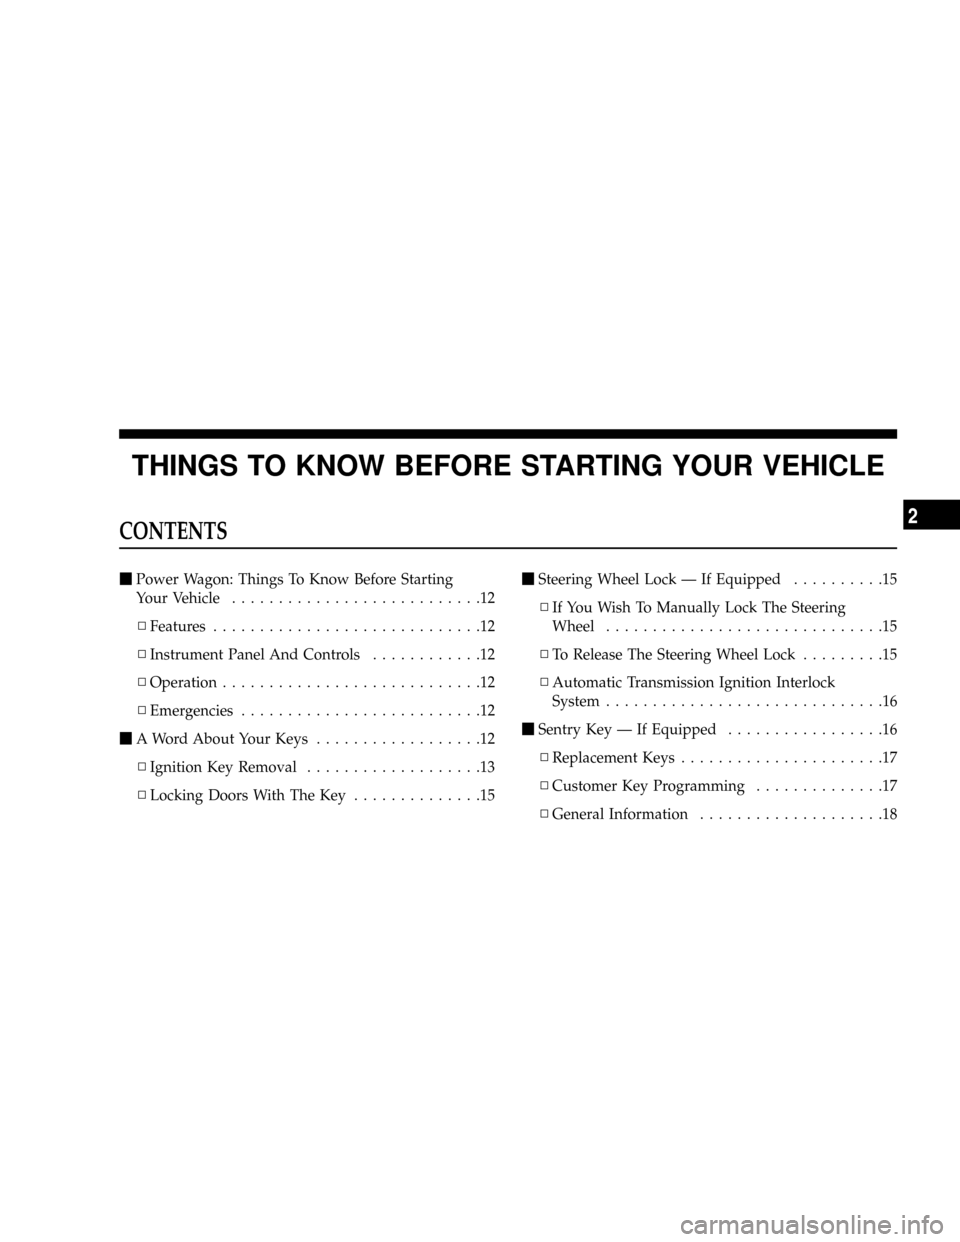 DODGE POWER WAGON 2007 2.G Owners Manual THINGS TO KNOW BEFORE STARTING YOUR VEHICLE
CONTENTS
mPower Wagon: Things To Know Before Starting
Your Vehicle...........................12
NFeatures.............................12
NInstrument Panel A